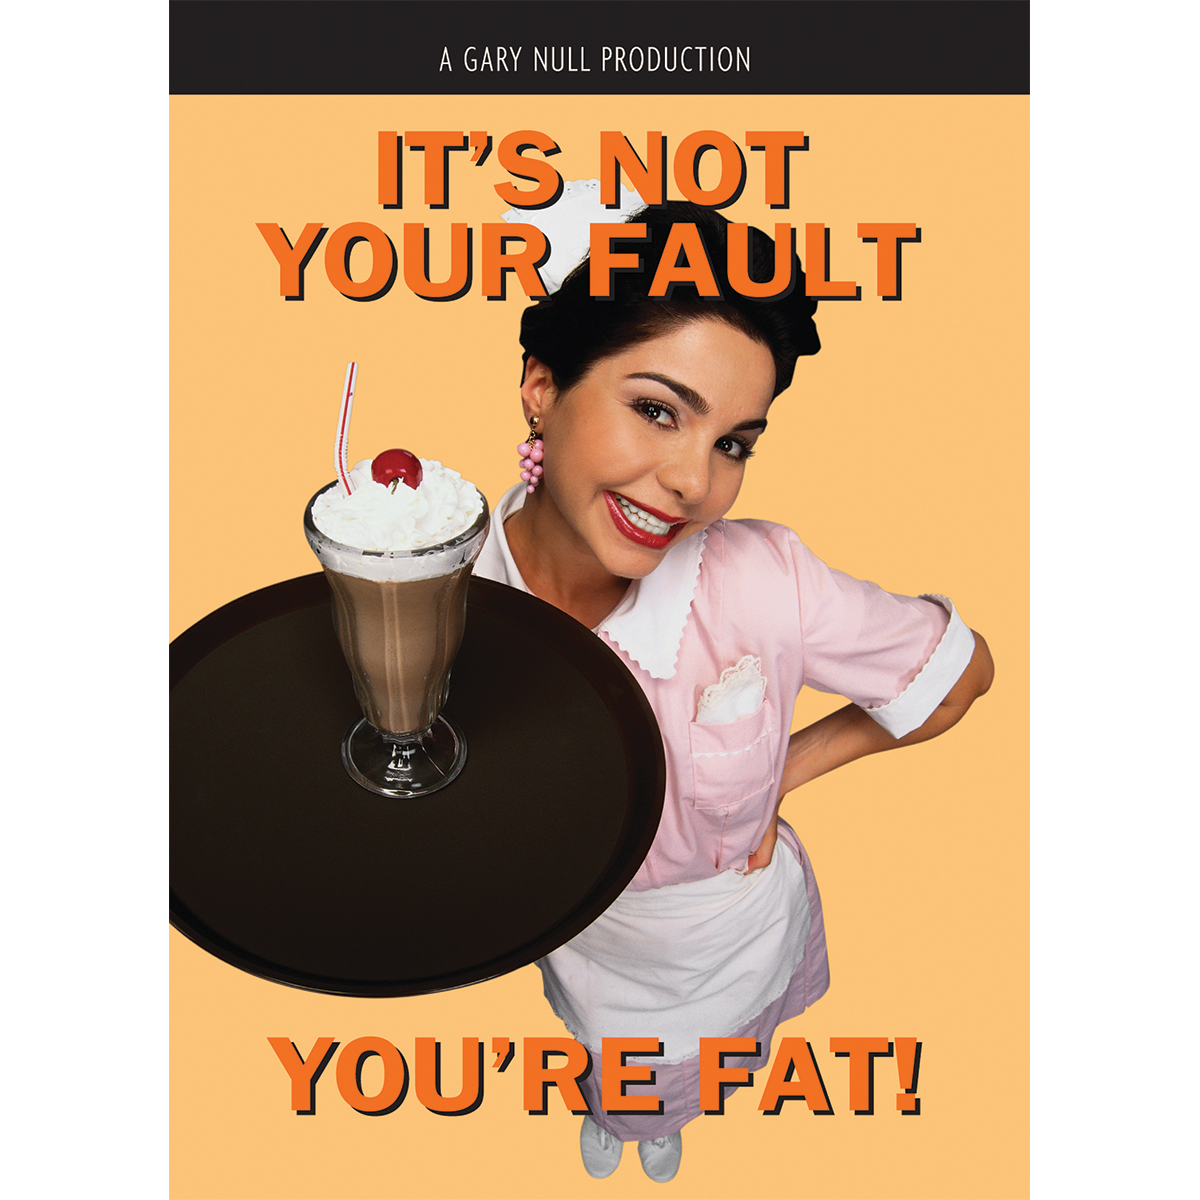 its-not-your-fault-youre-fat_6ba6746e-e985-4091-a1dd-2ba9599a5a24.png